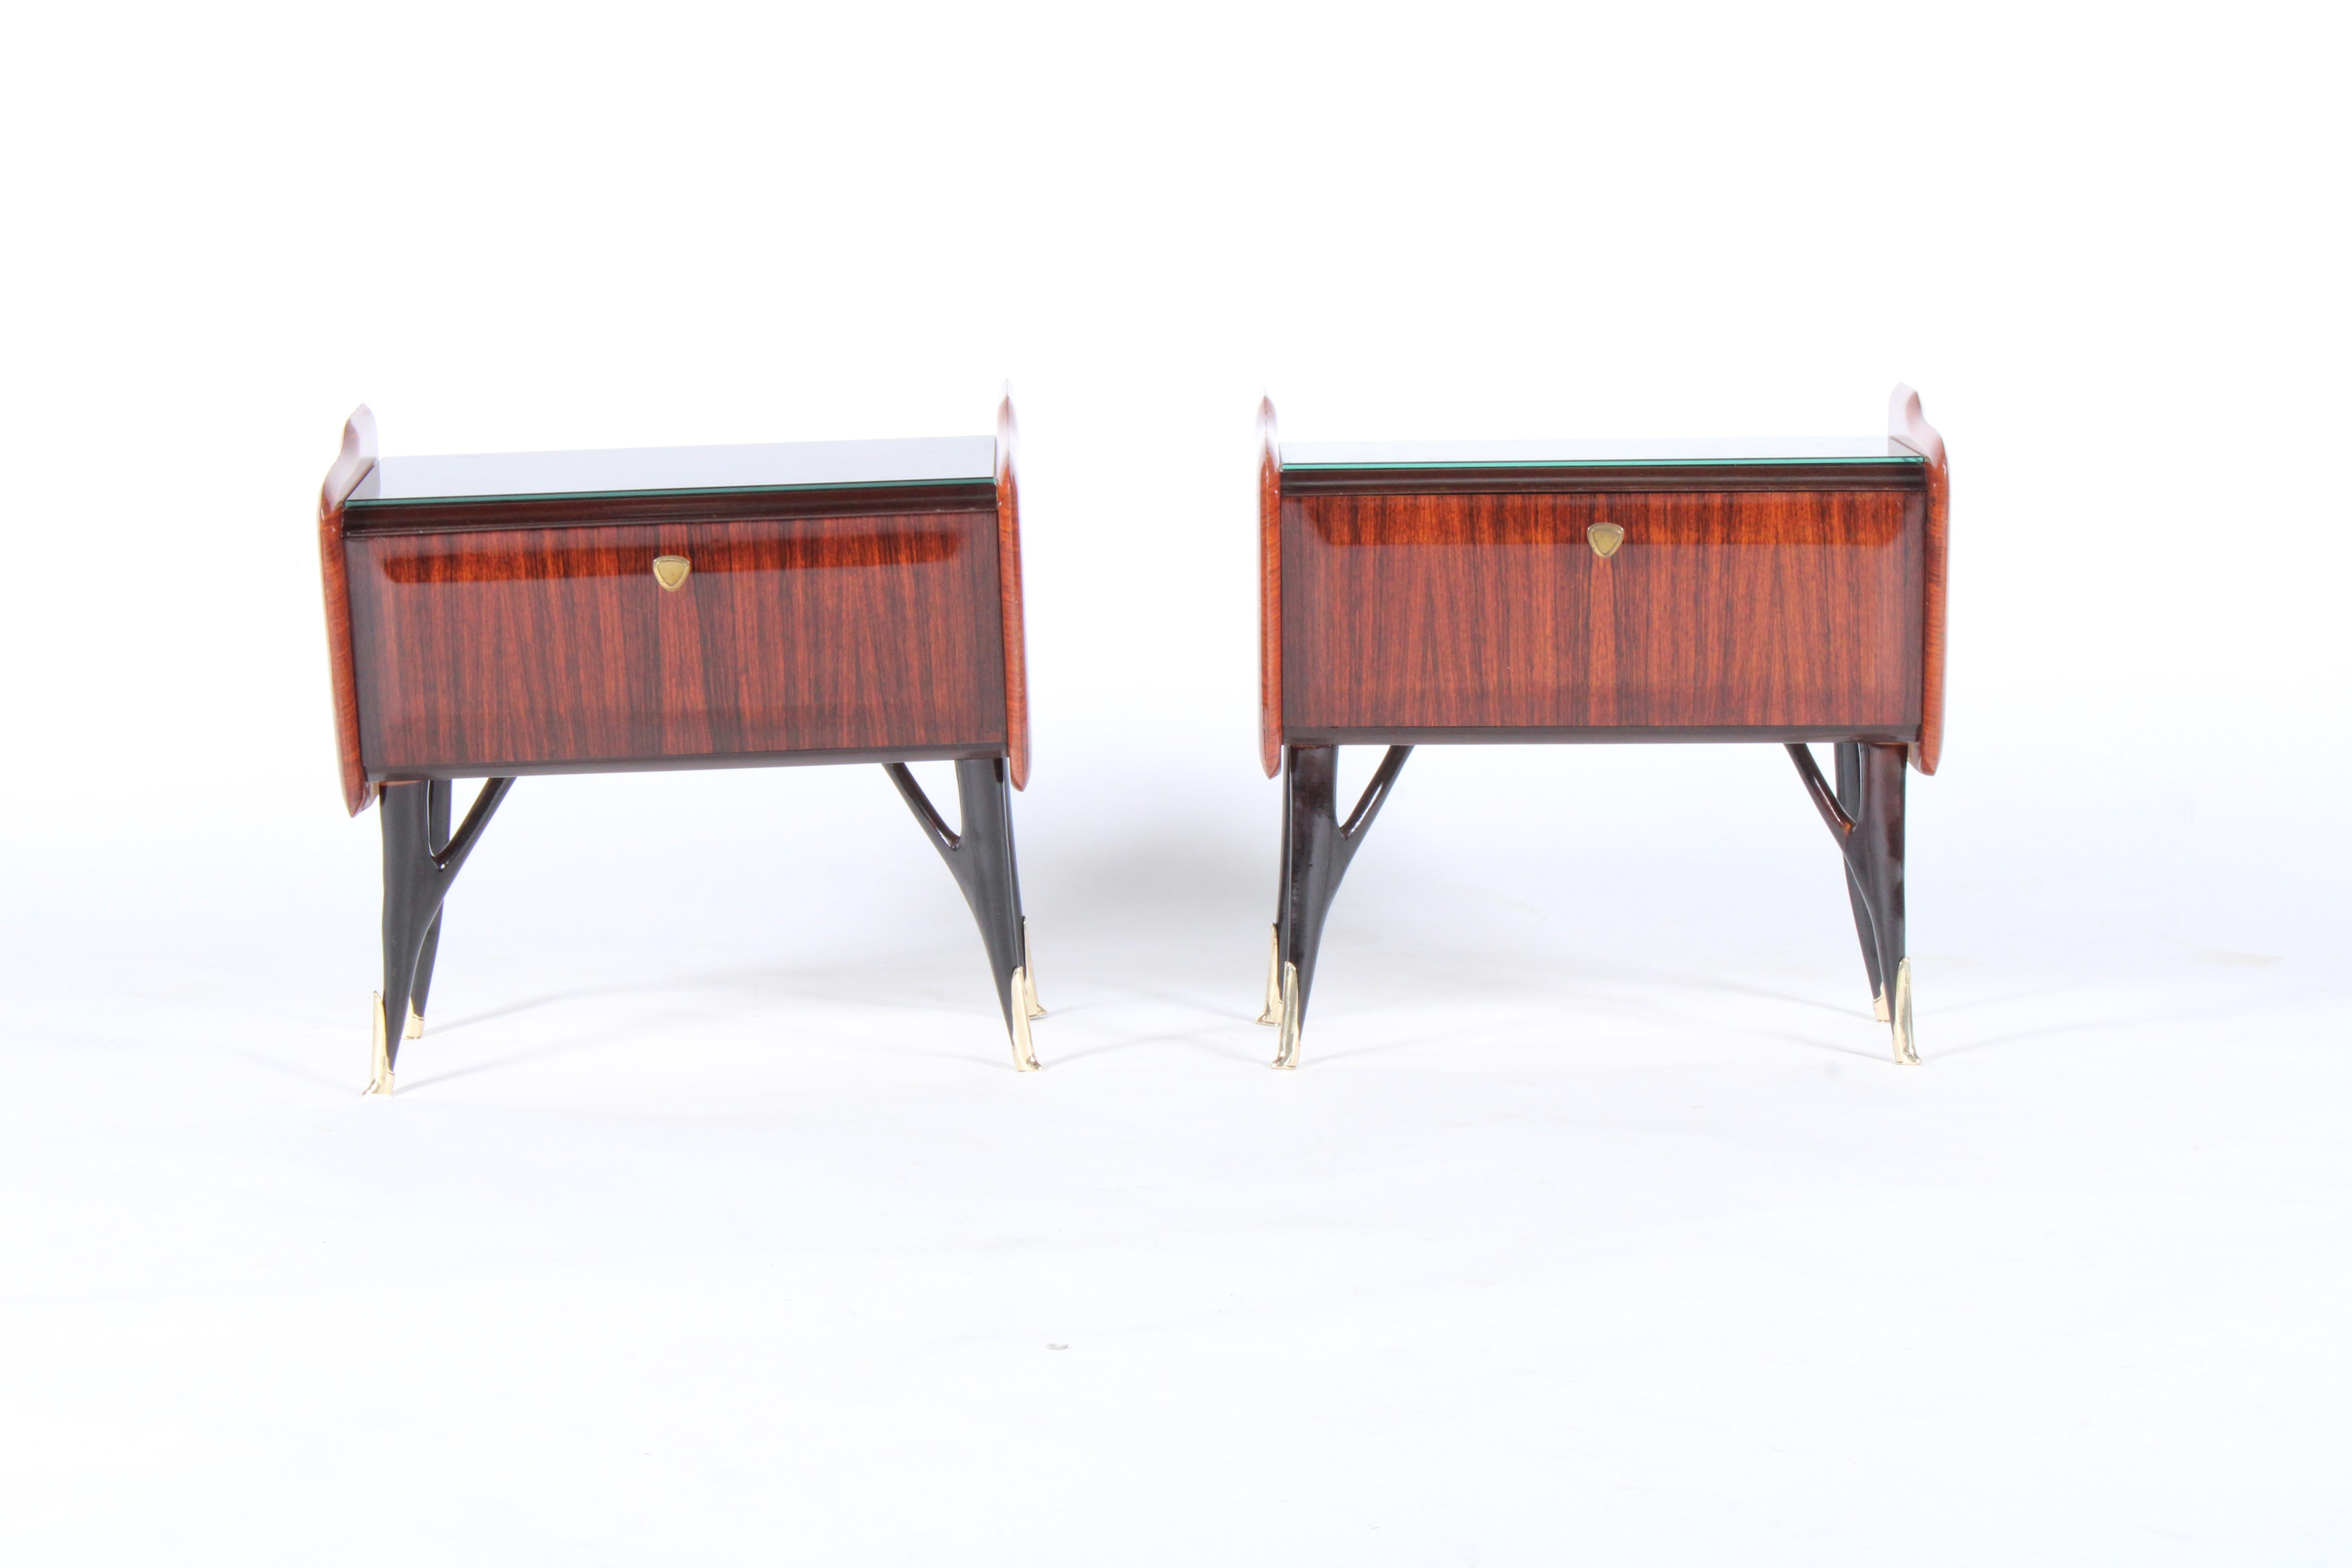 Exceptional pair of original midcentury Italian bedside cabinets in a beautiful pallisandro rosewood. Set on a sculptural ebonized base very much in the manner of Ico Parisi. This pair have an inset black glass top and have drop down door storage